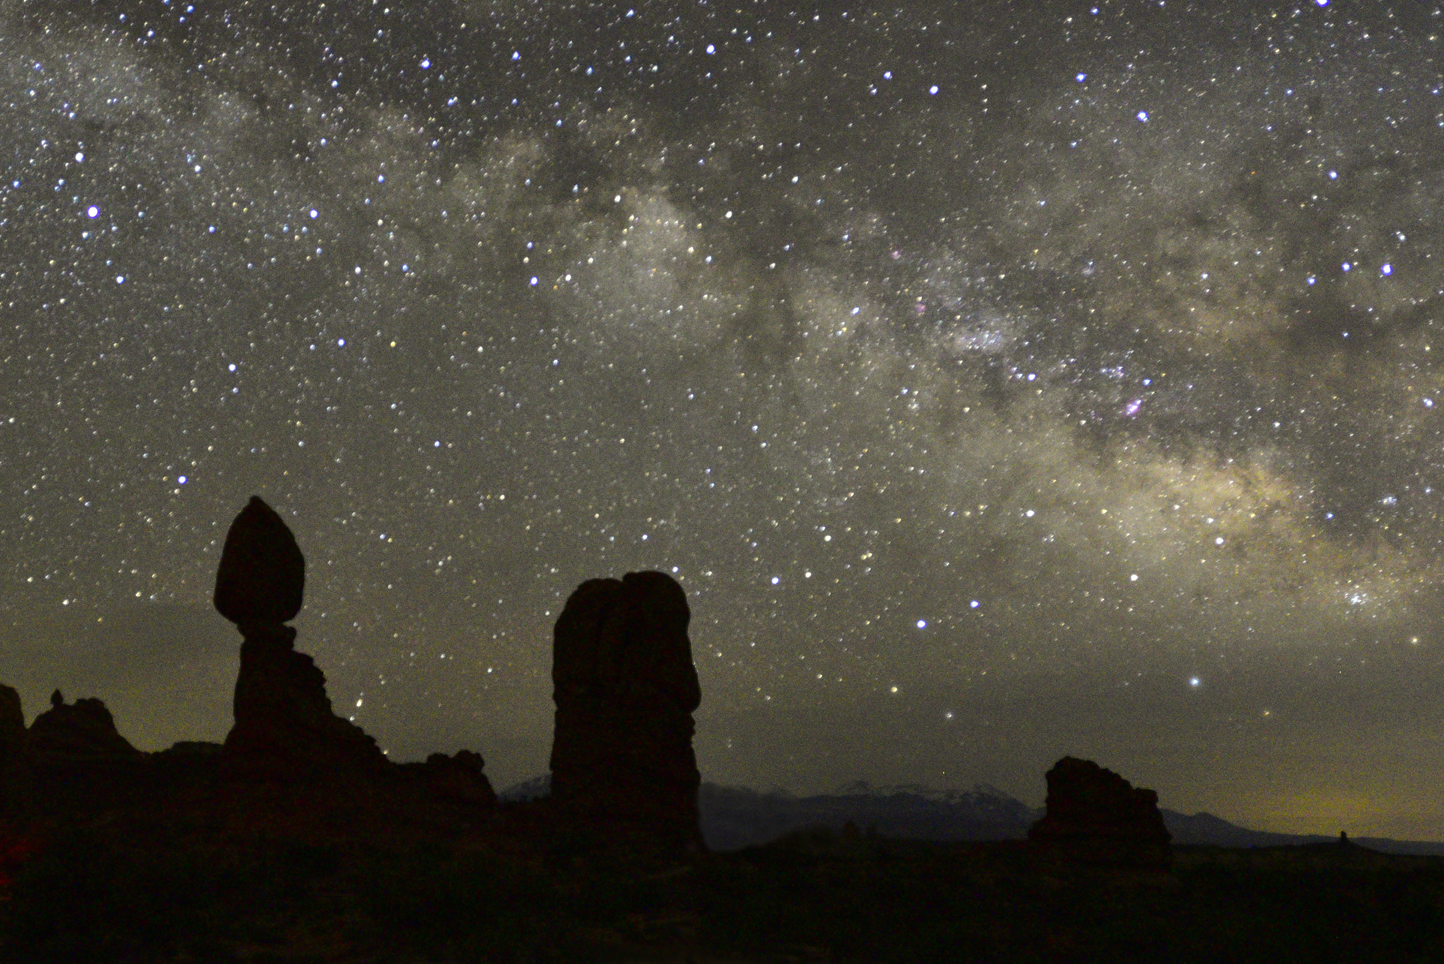 The Milky Way  -  from Balanced Rock Parking Lot, Arches National Park, Utah